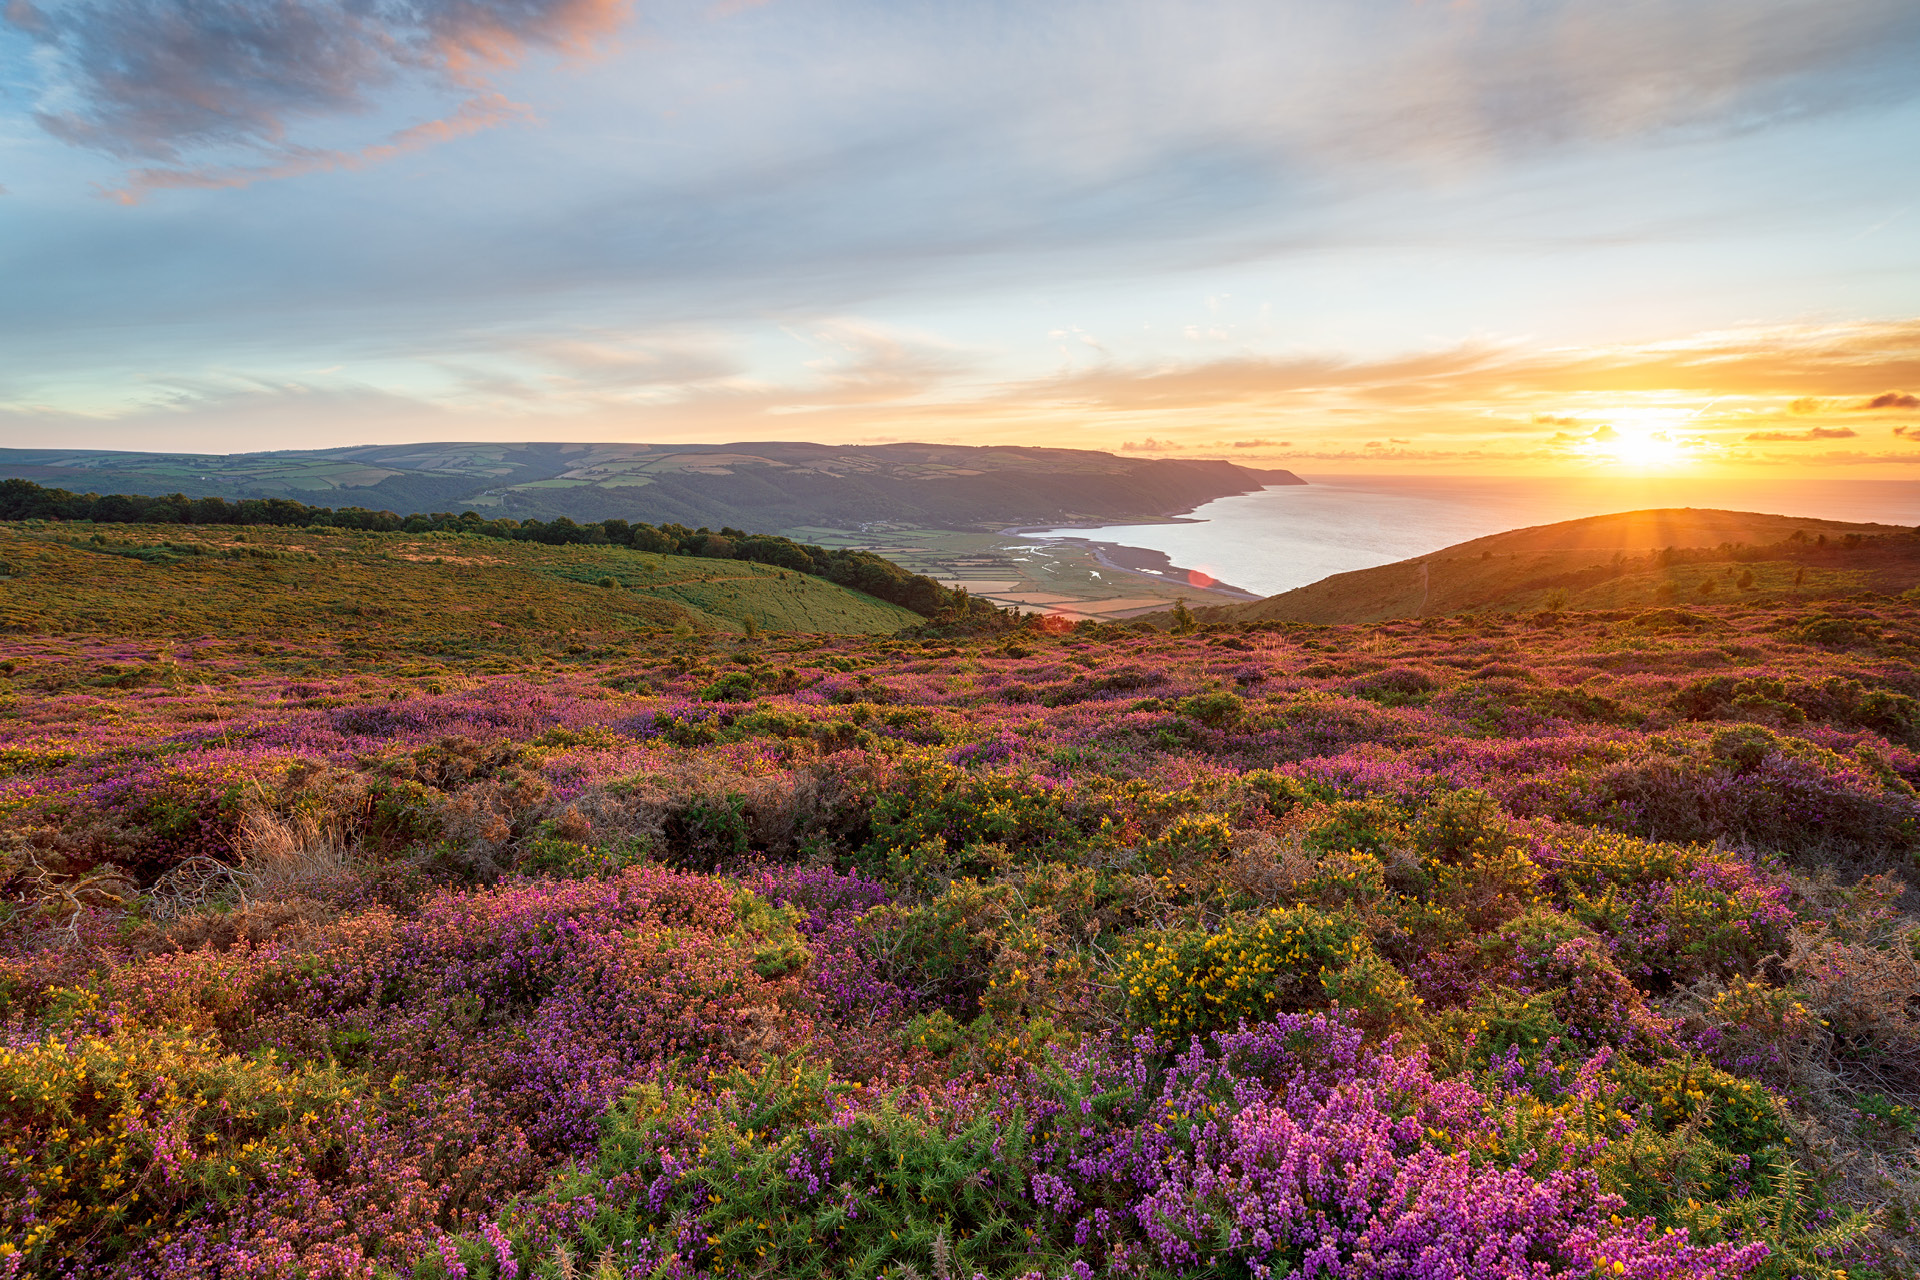 Purple heather in August in the foreground of the view of Exmoor National Park